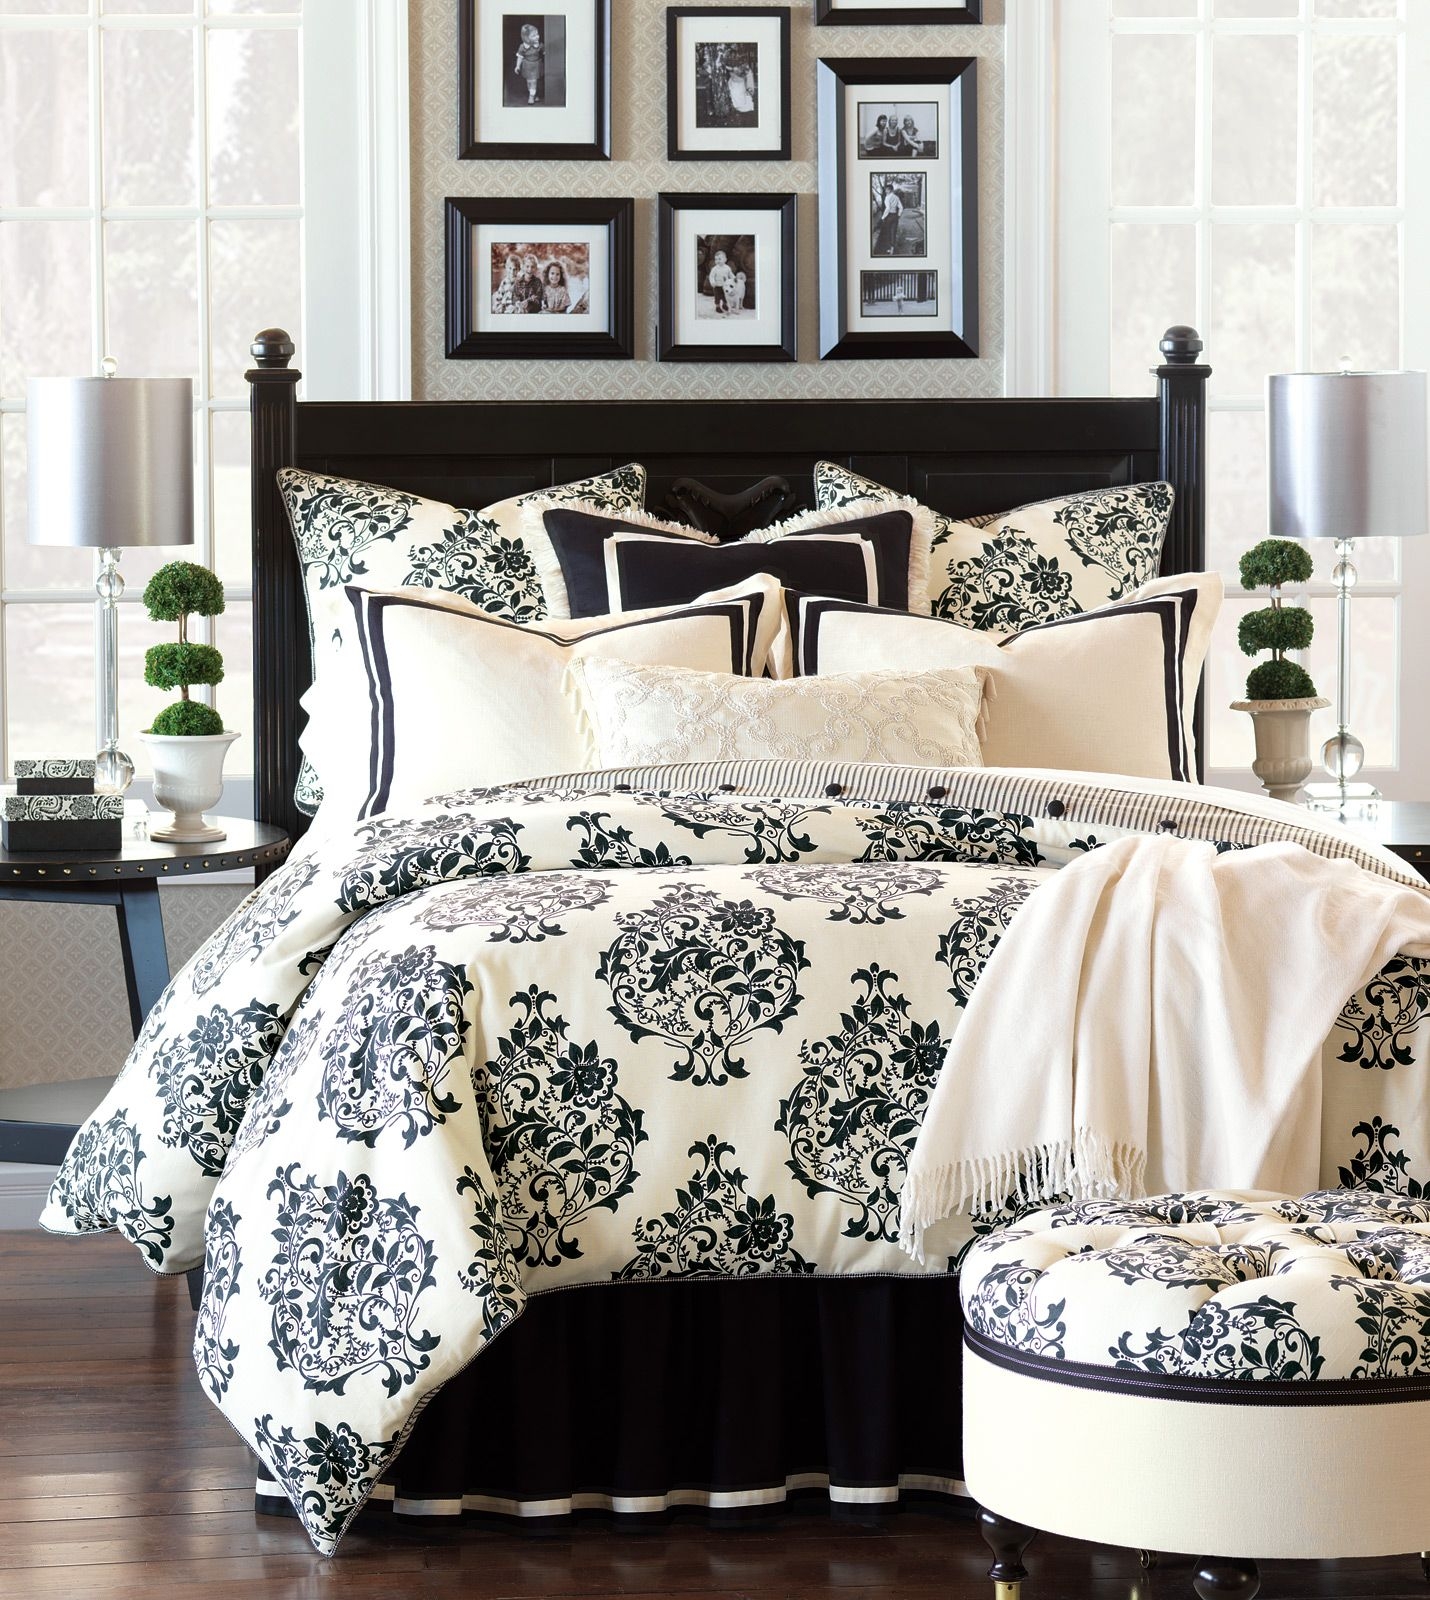 Black and white patterned duvet covers